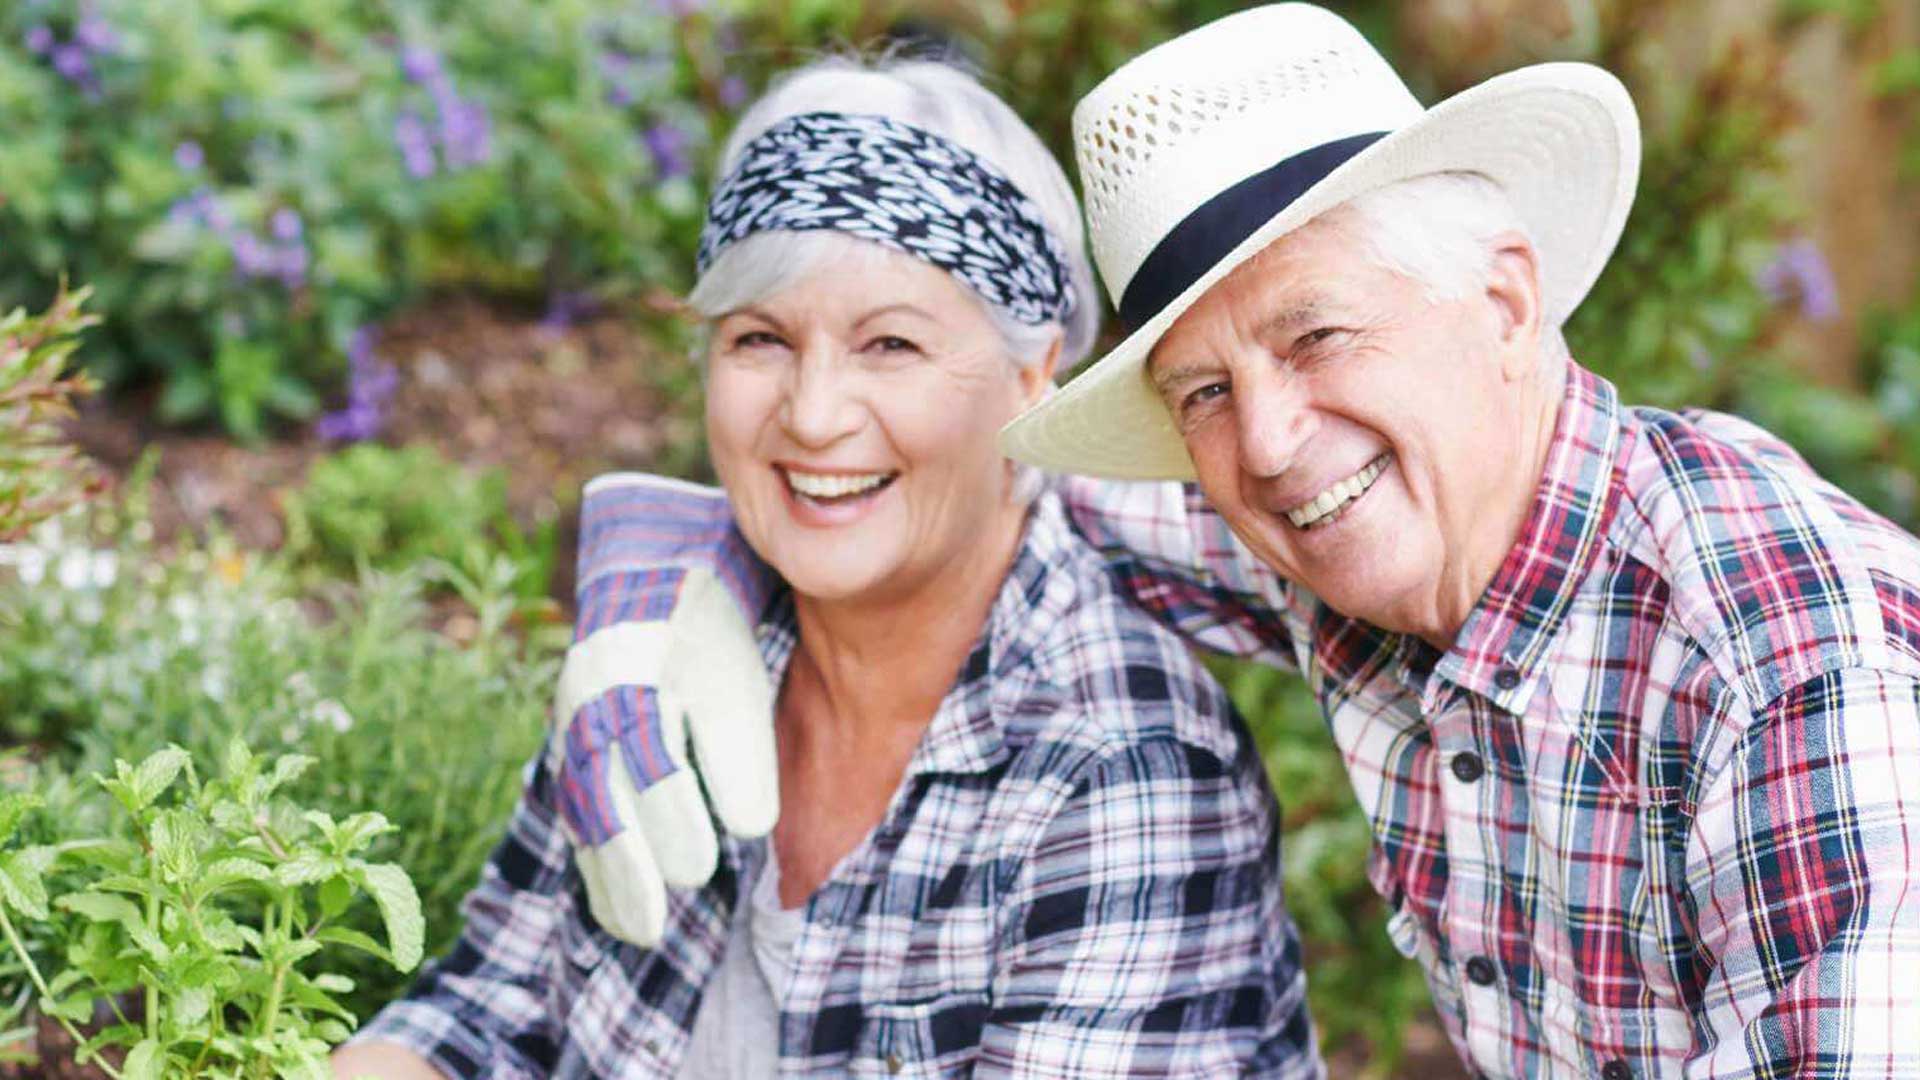 Smiling Old Couple Image